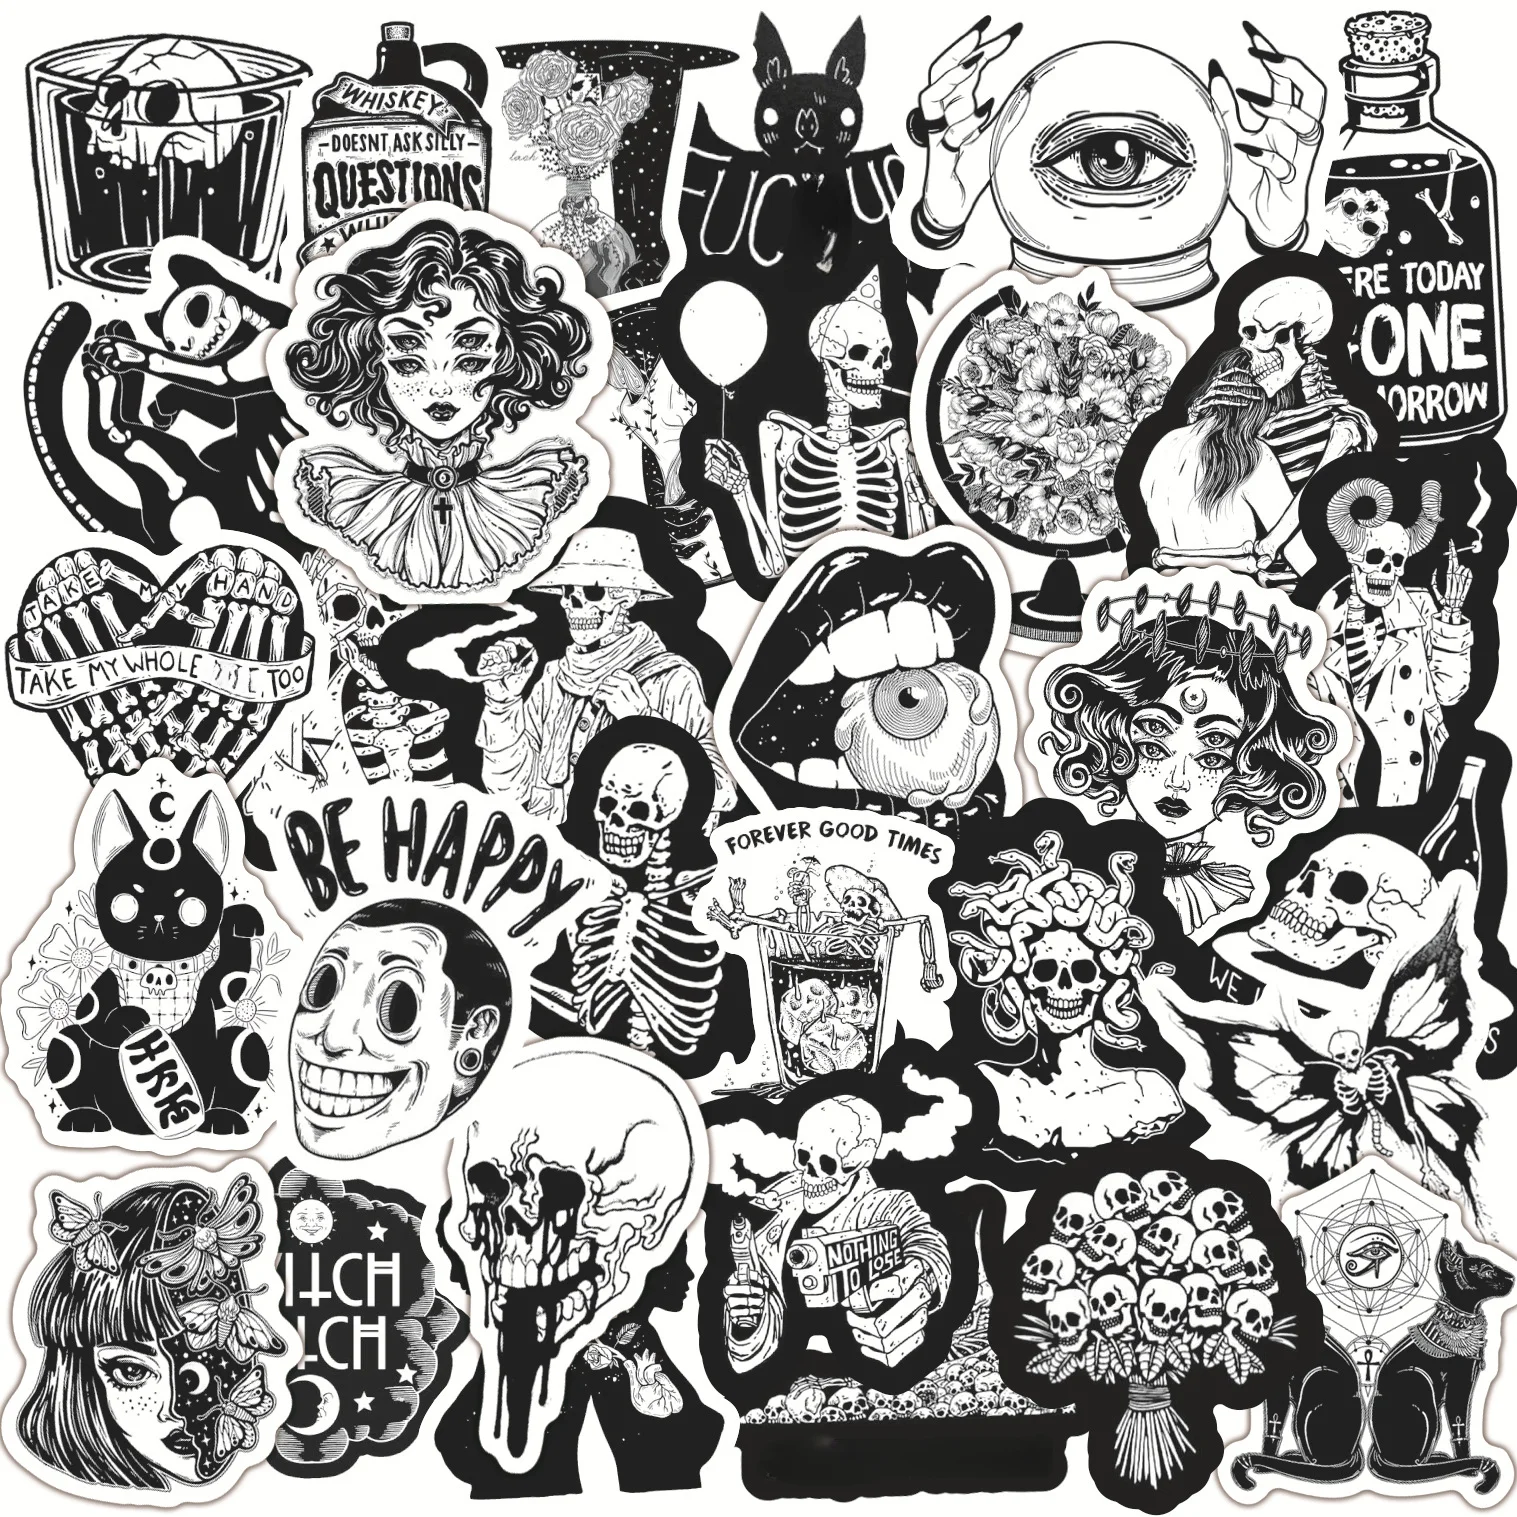 100PCS Mixed Black White Gothic Stickers Graffiti Motorcycle Skateboard Travel Phone Case Decal Toys Sticker Waterproof 200pcs black cards white blank retro diy kraft paper blank card diy graffiti word cards gift greetings vintage card message note